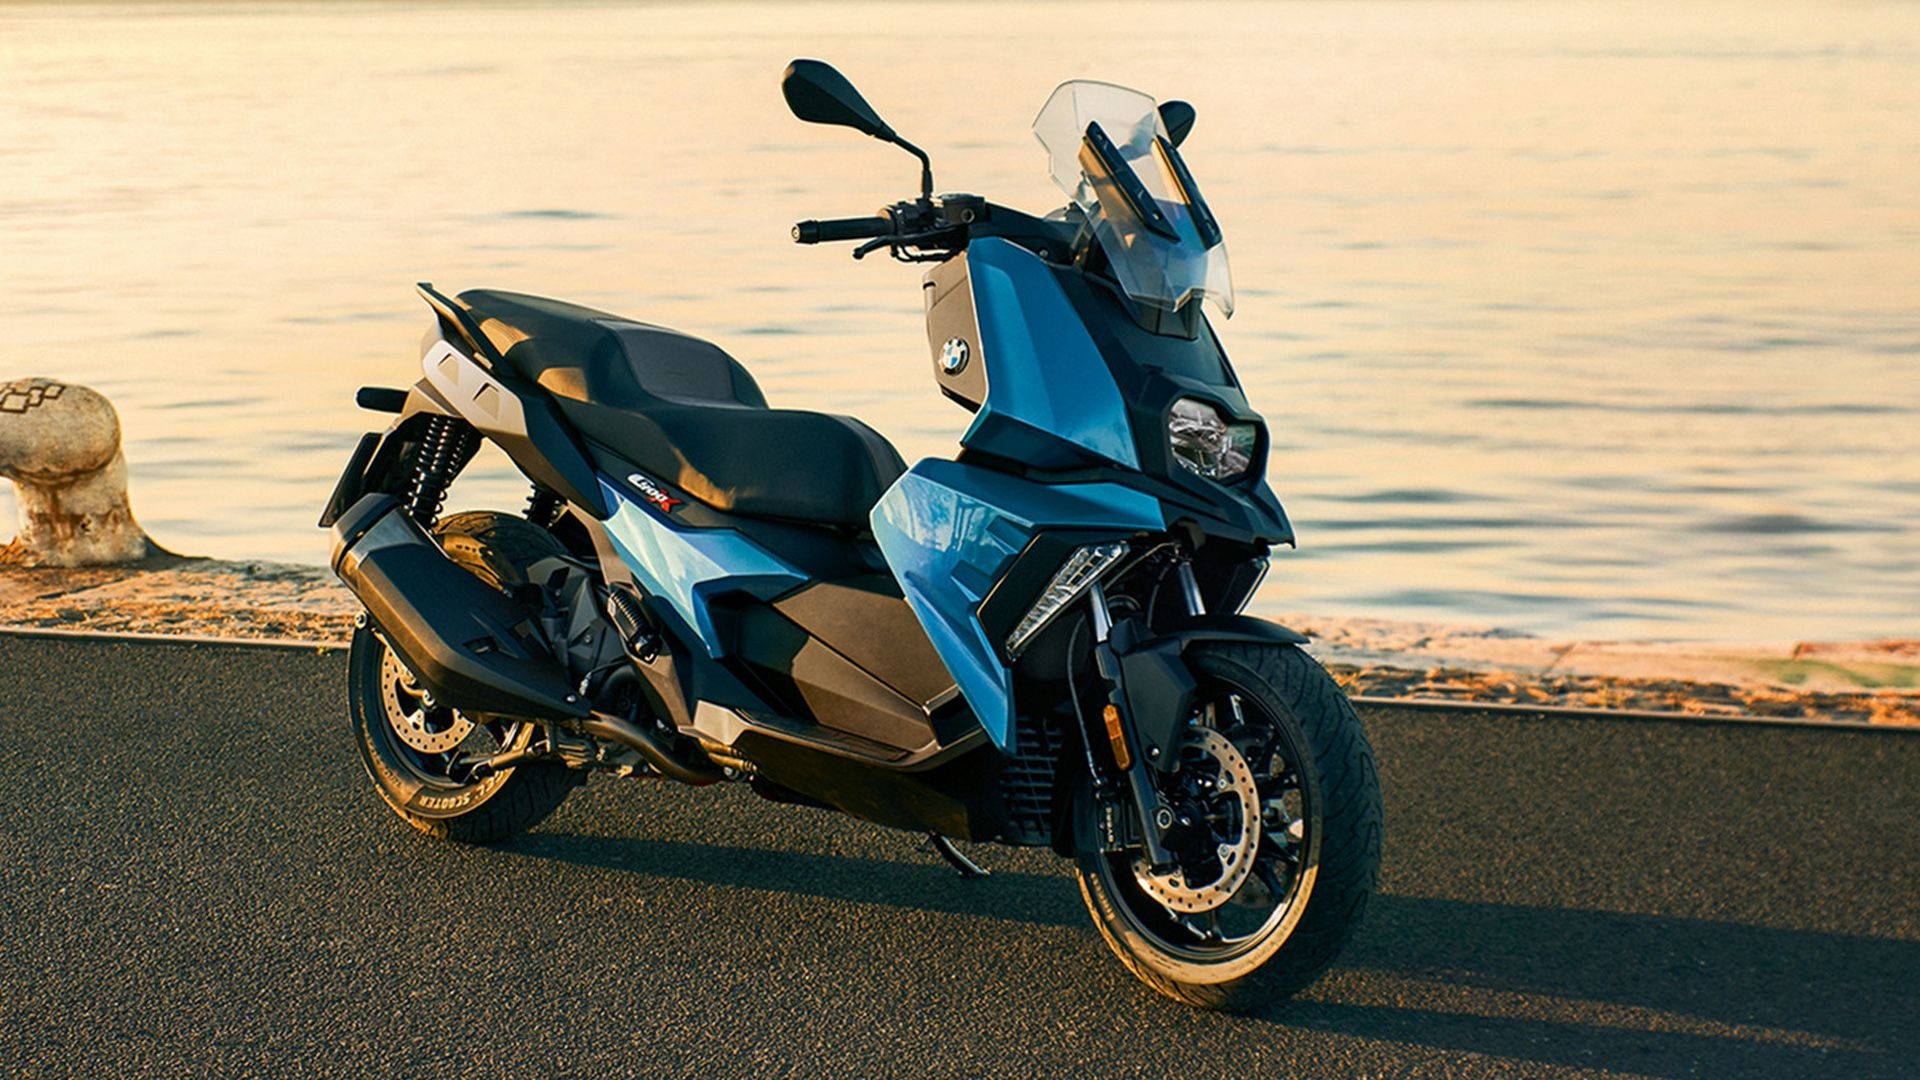 BMW C 400 X, Price, Features, Specifications, 1920x1080 Full HD Desktop